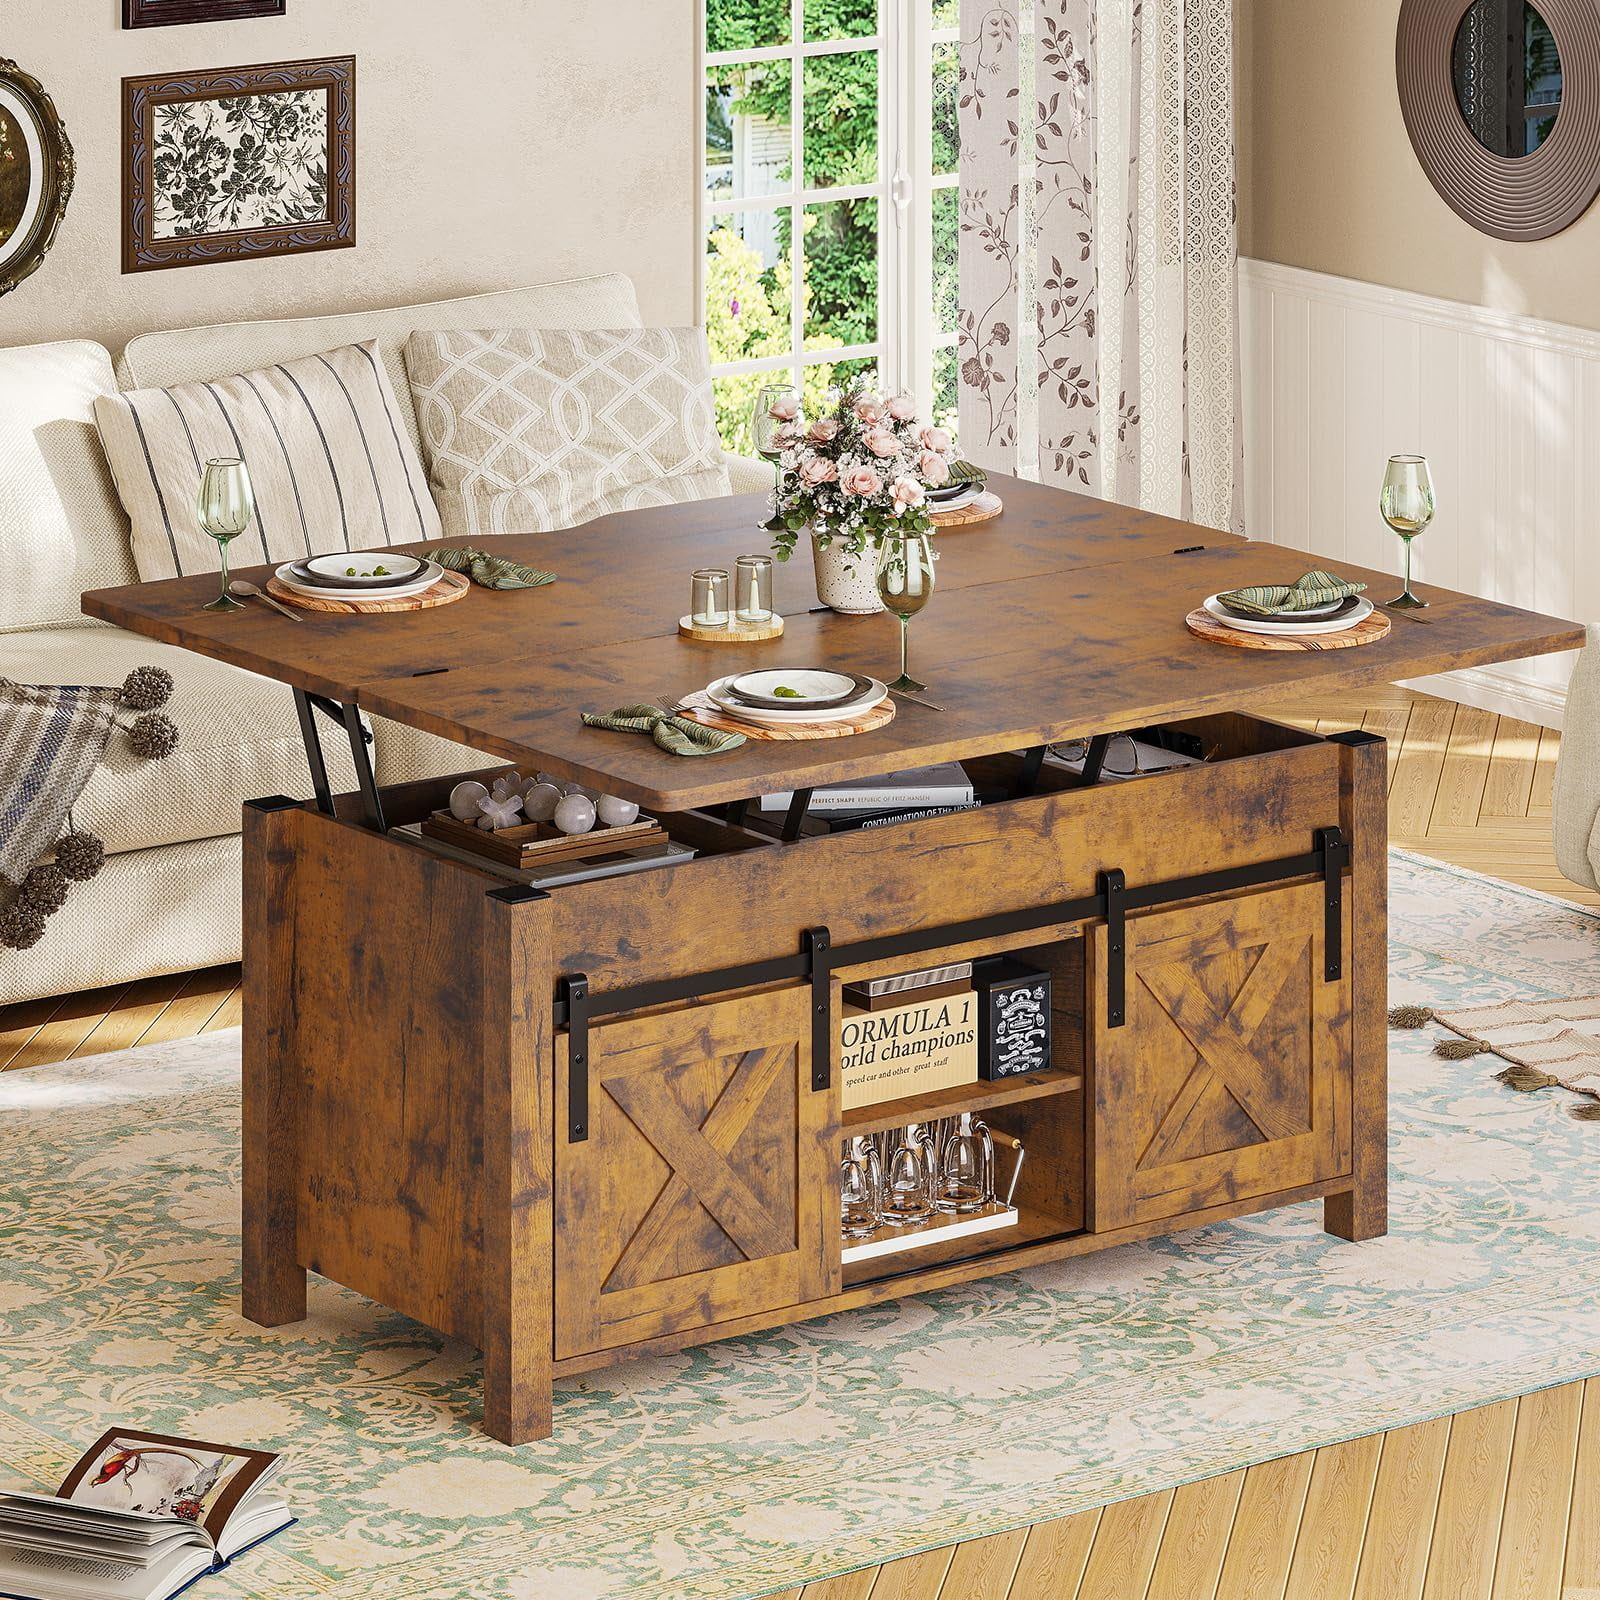 Coffee Table For Living Room, Farmhouse Lift Top Coffee Tables With Storage  And Hidden Compartment, Rising Tabletop Center Table For Living Room  Reception Room, Rustic Brown – Walmart Within Lift Top Coffee Tables (View 15 of 15)